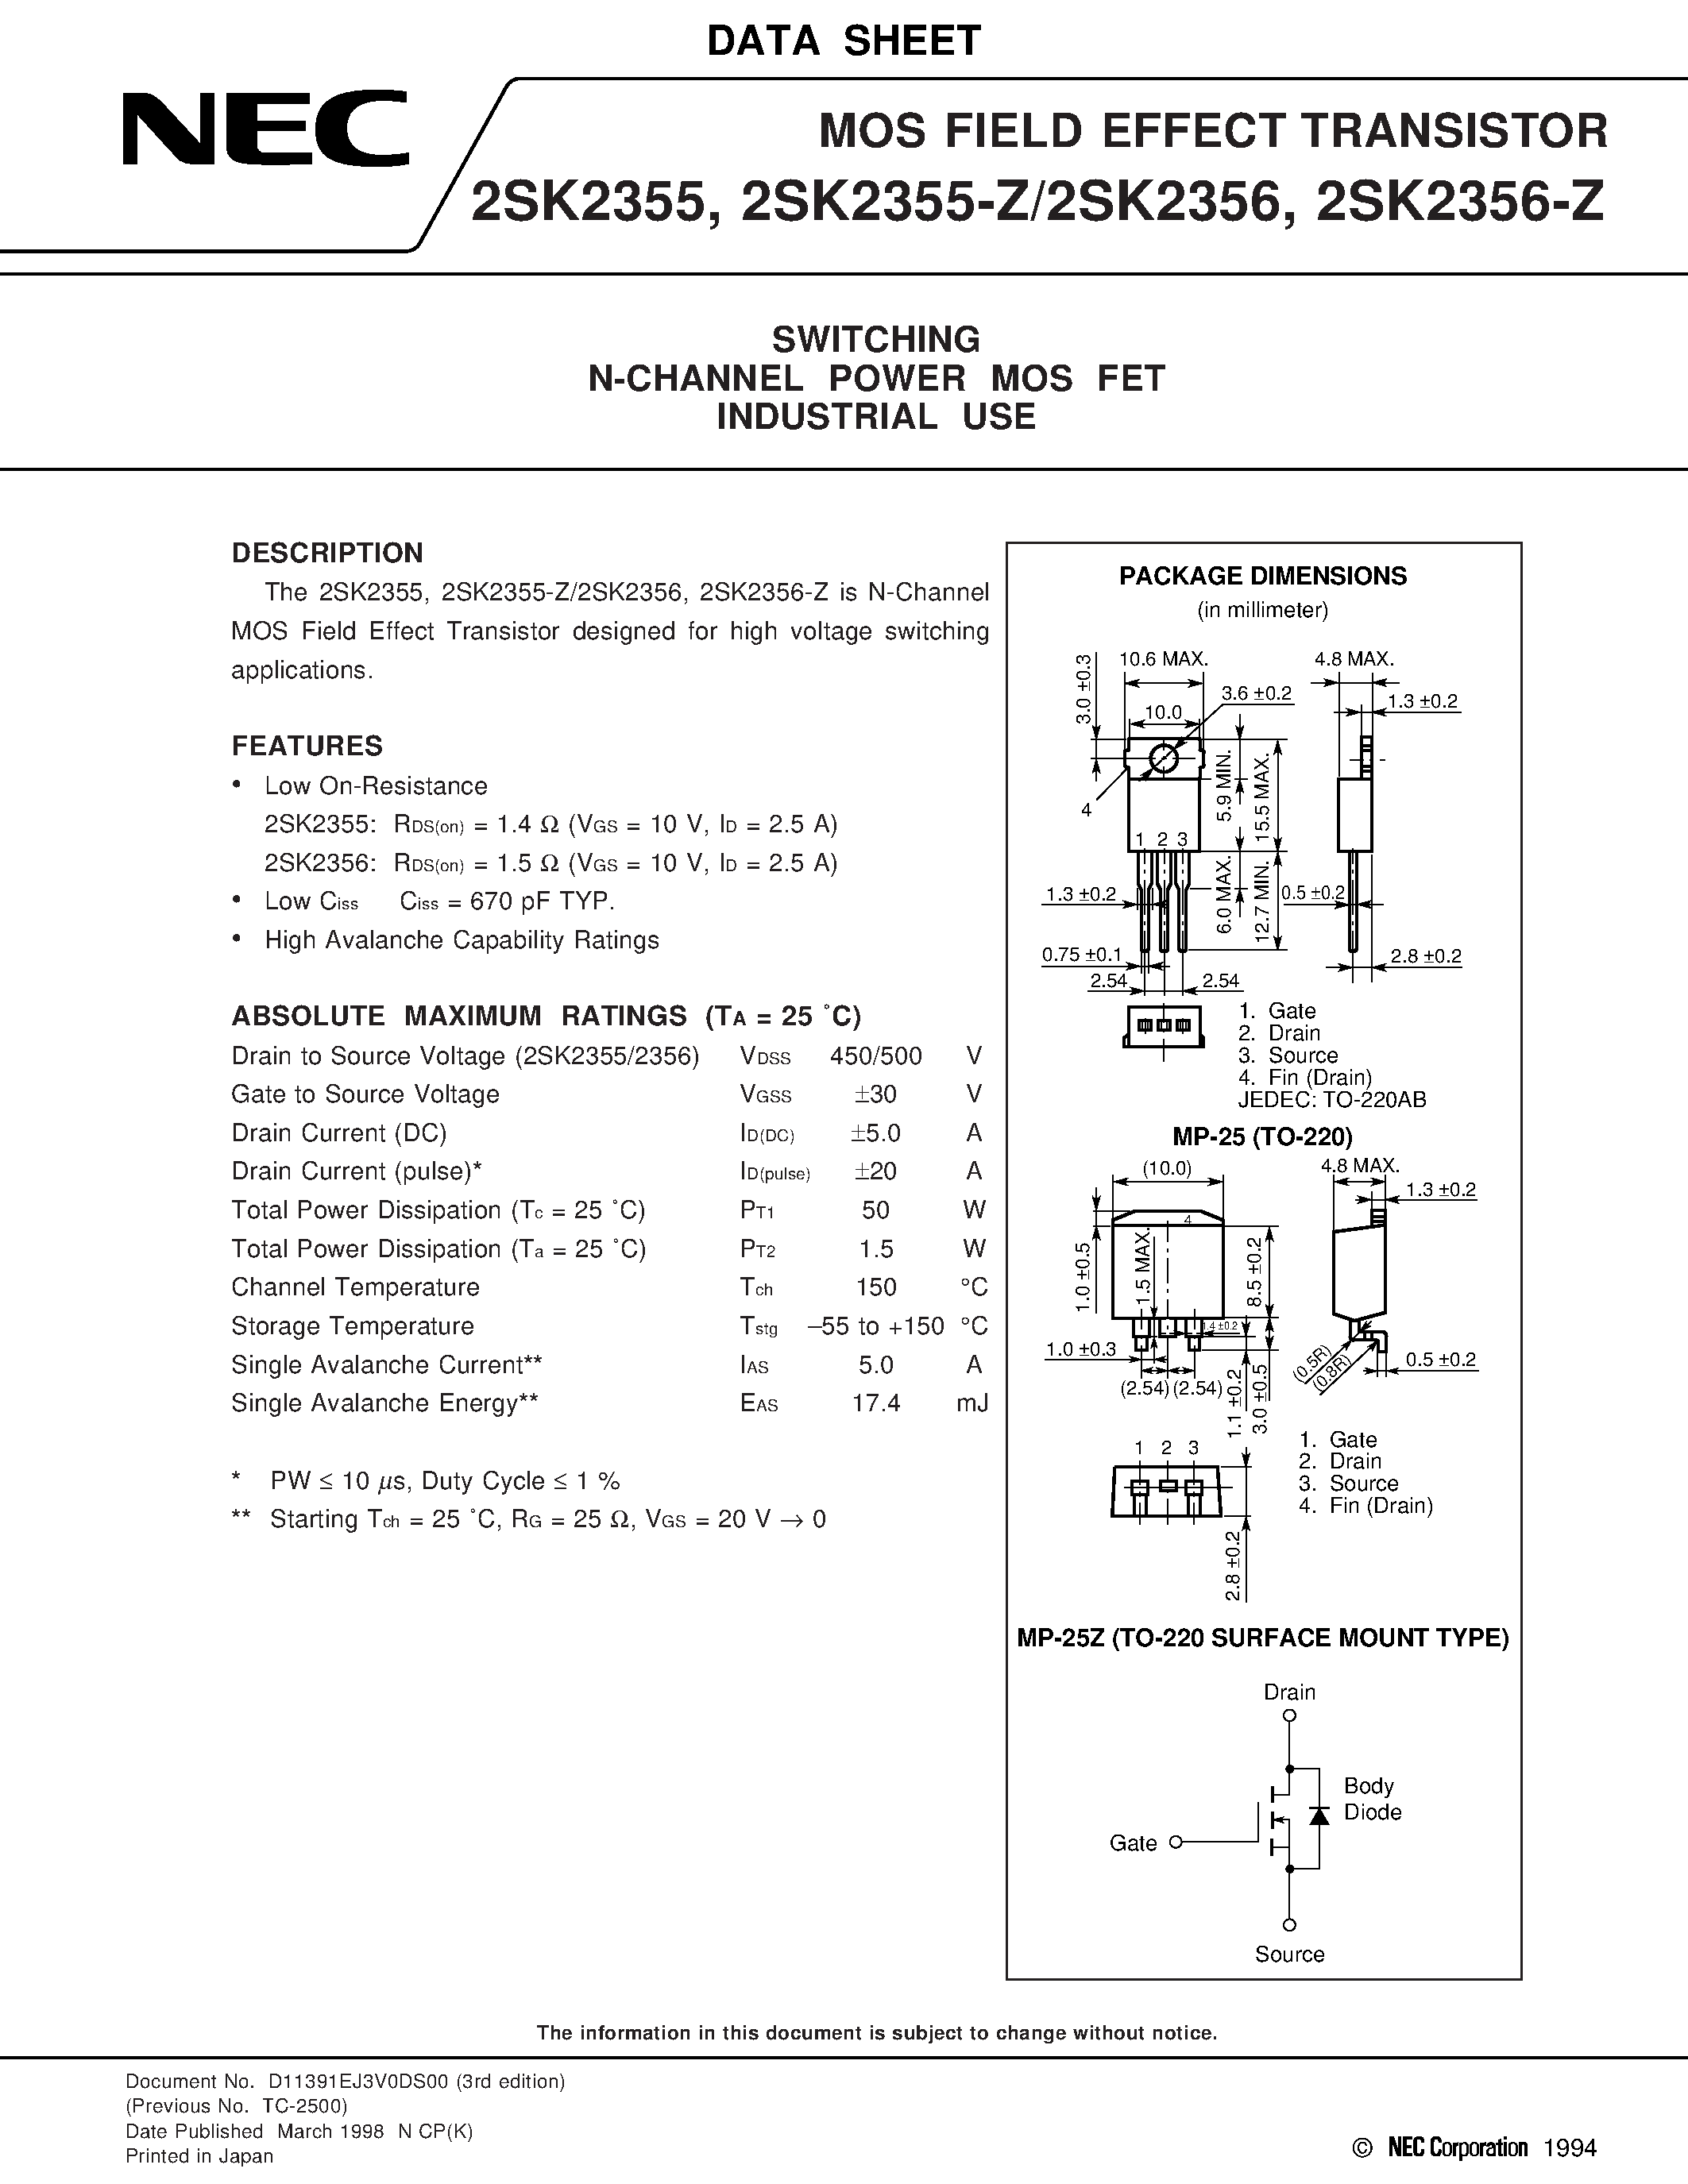 Datasheet 2SK2355-Z - SWITCHING N-CHANNEL POWER MOS FET INDUSTRIAL USE page 1